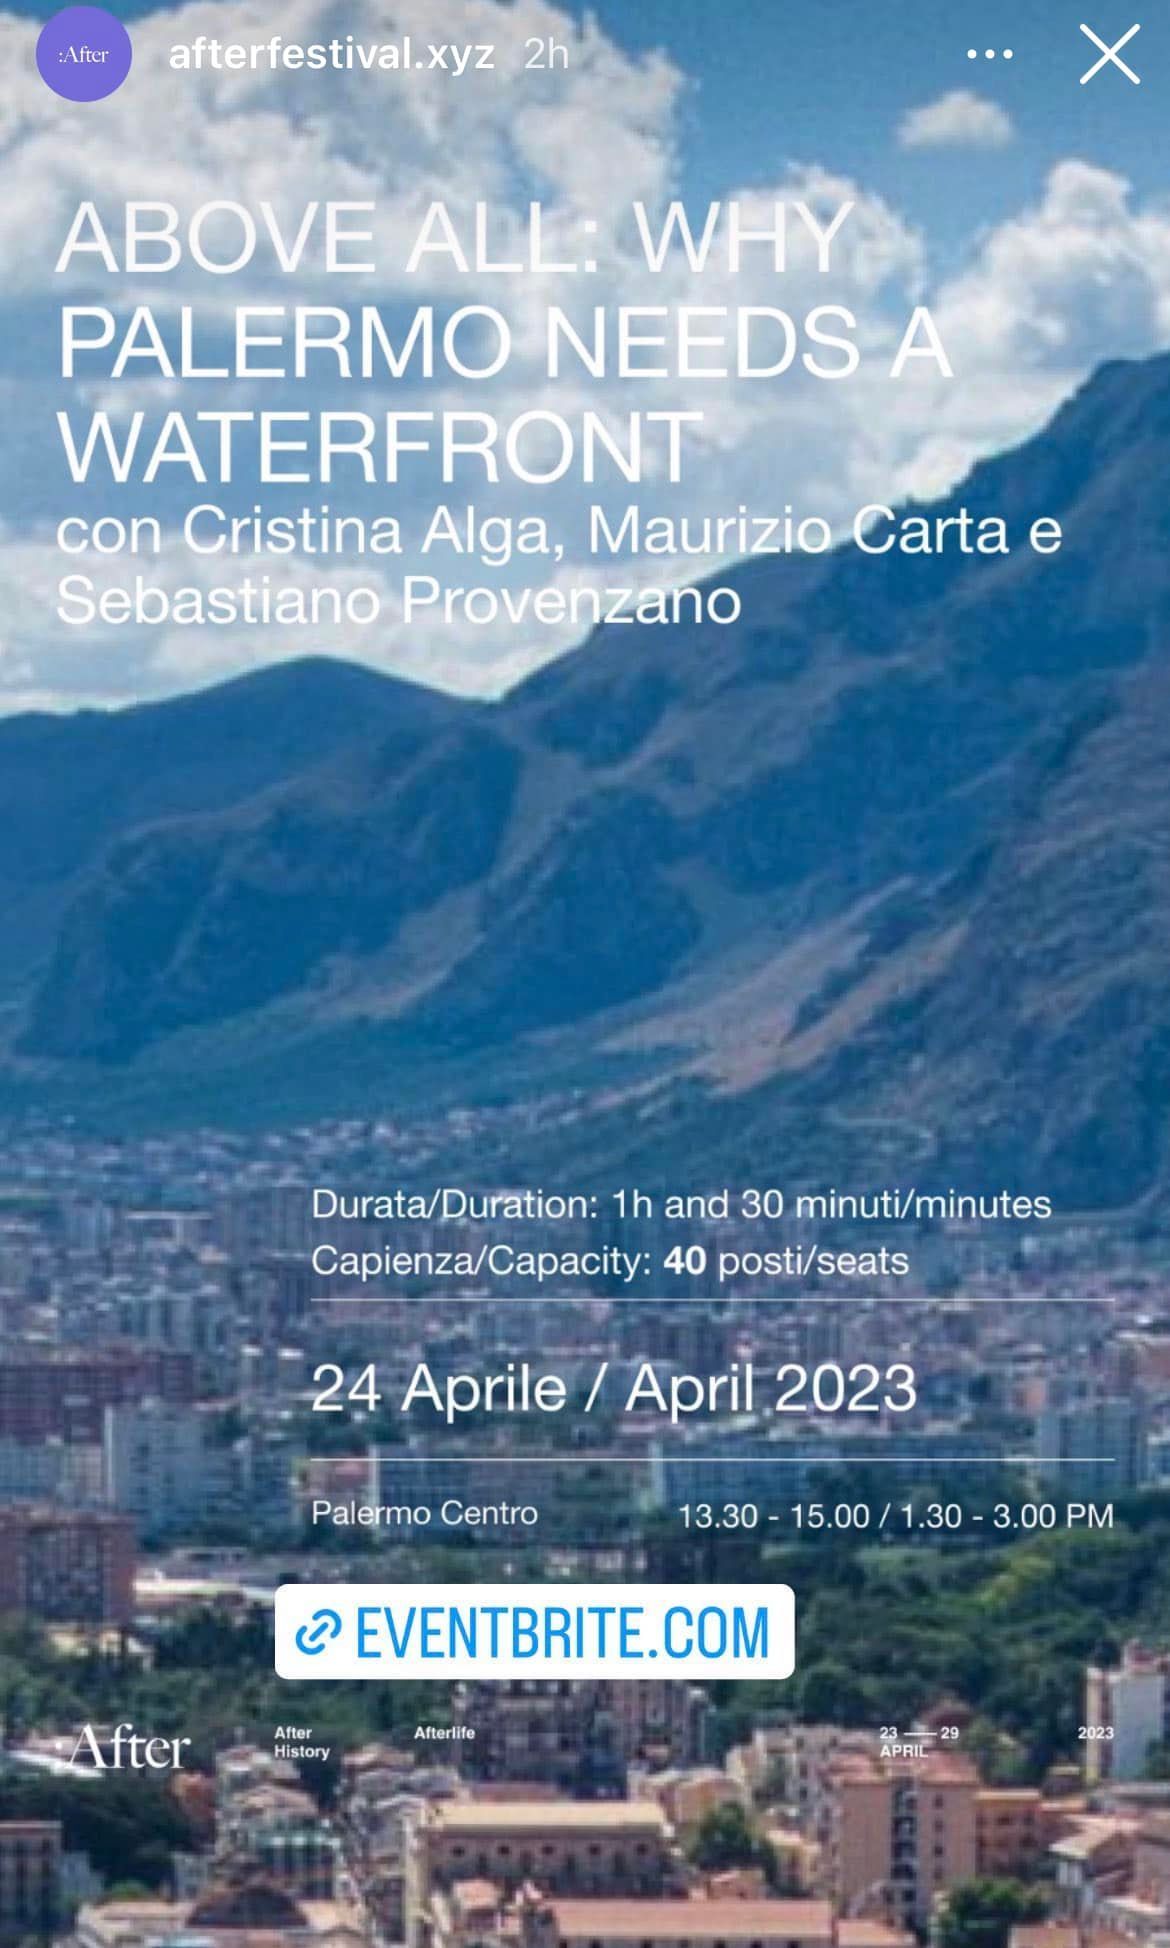 Above All: Why Palermo needs a Waterfront?